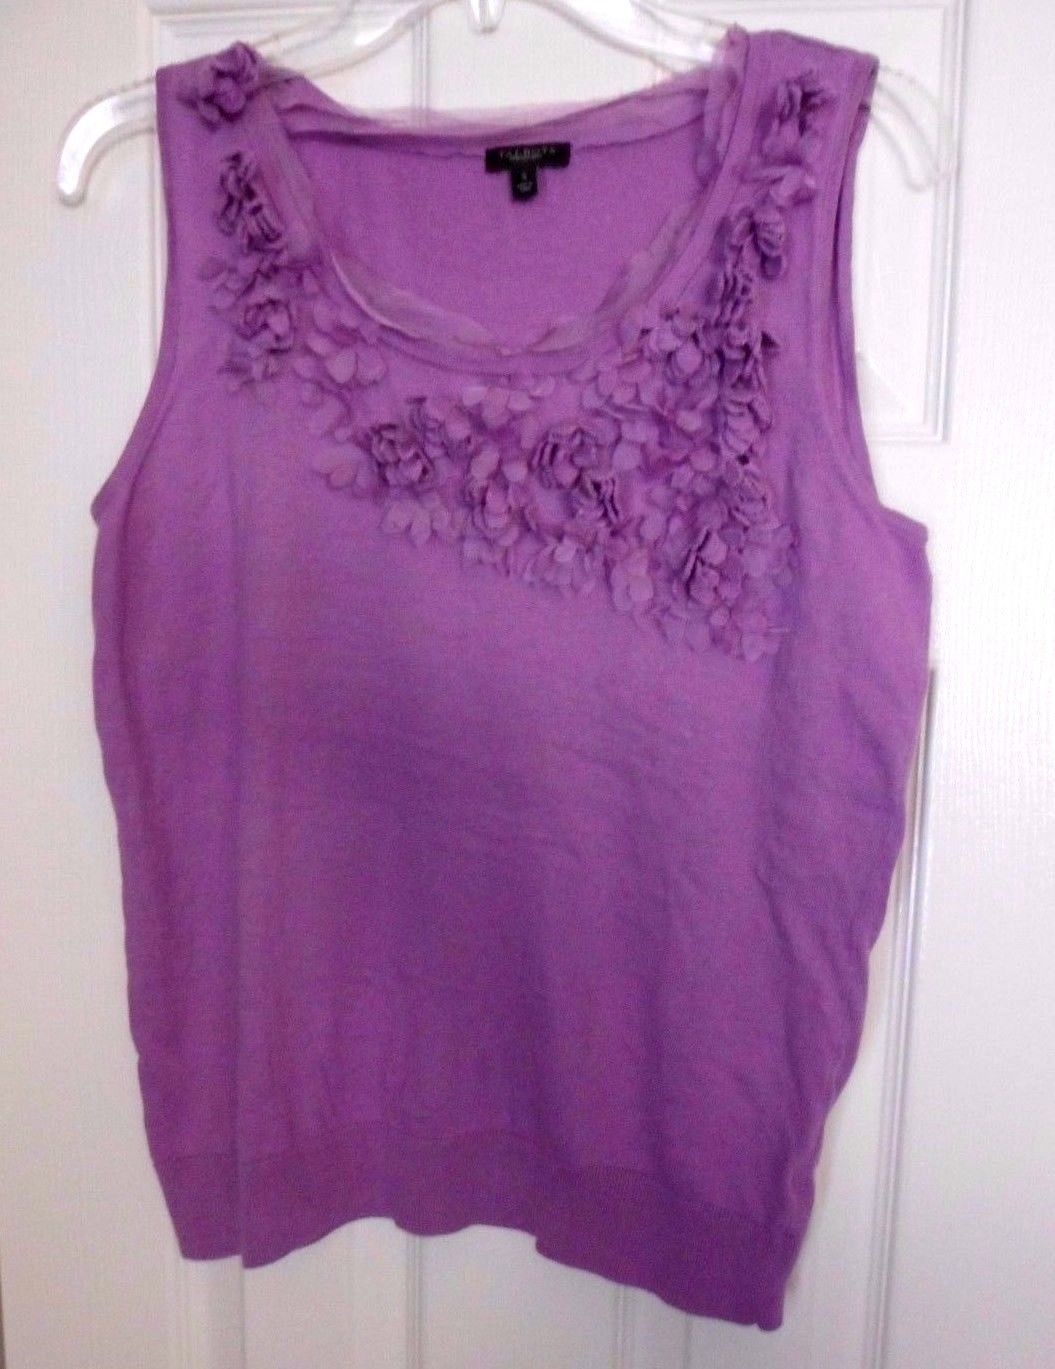 Primary image for TALBOTS Top Shirt Tank FLOWERS Size S Purple Sleeveless